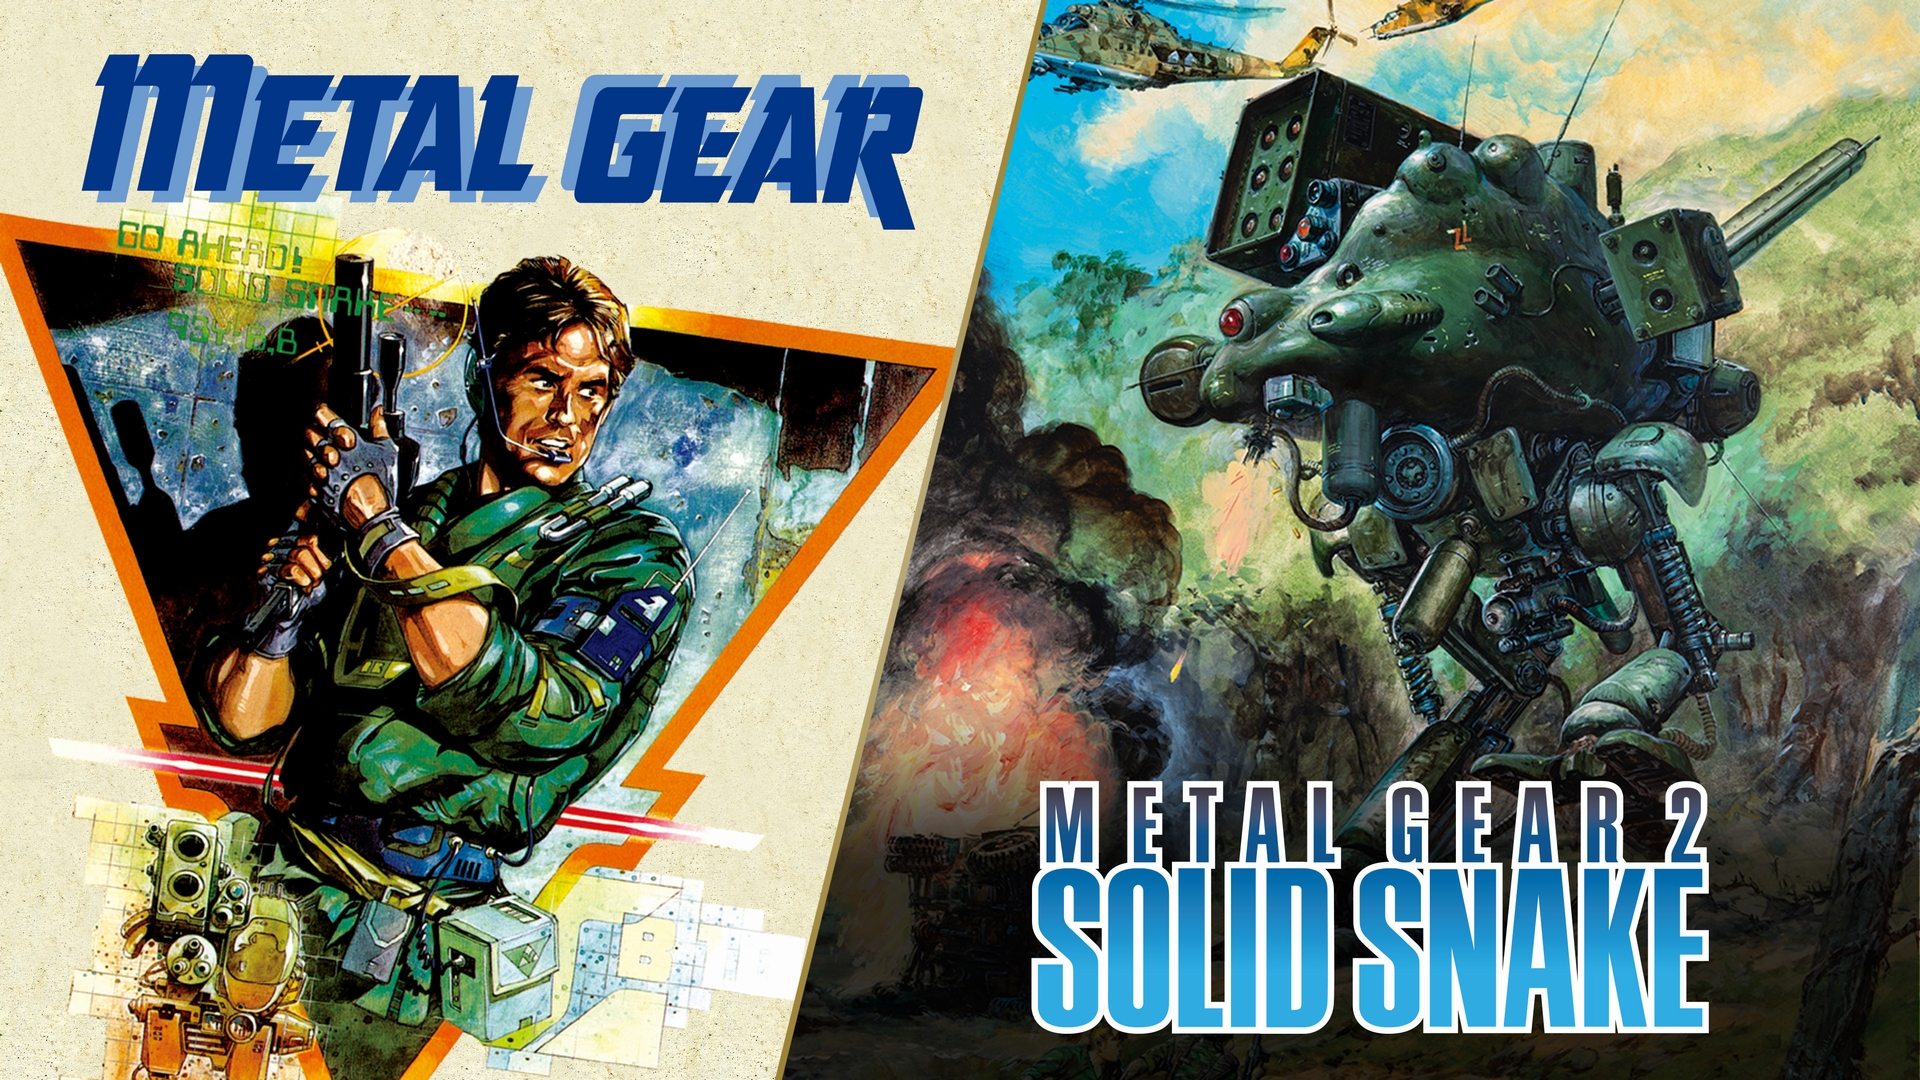 Metal Gear Solid: Master Collection Vol. 1 (2023), Switch eShop Game